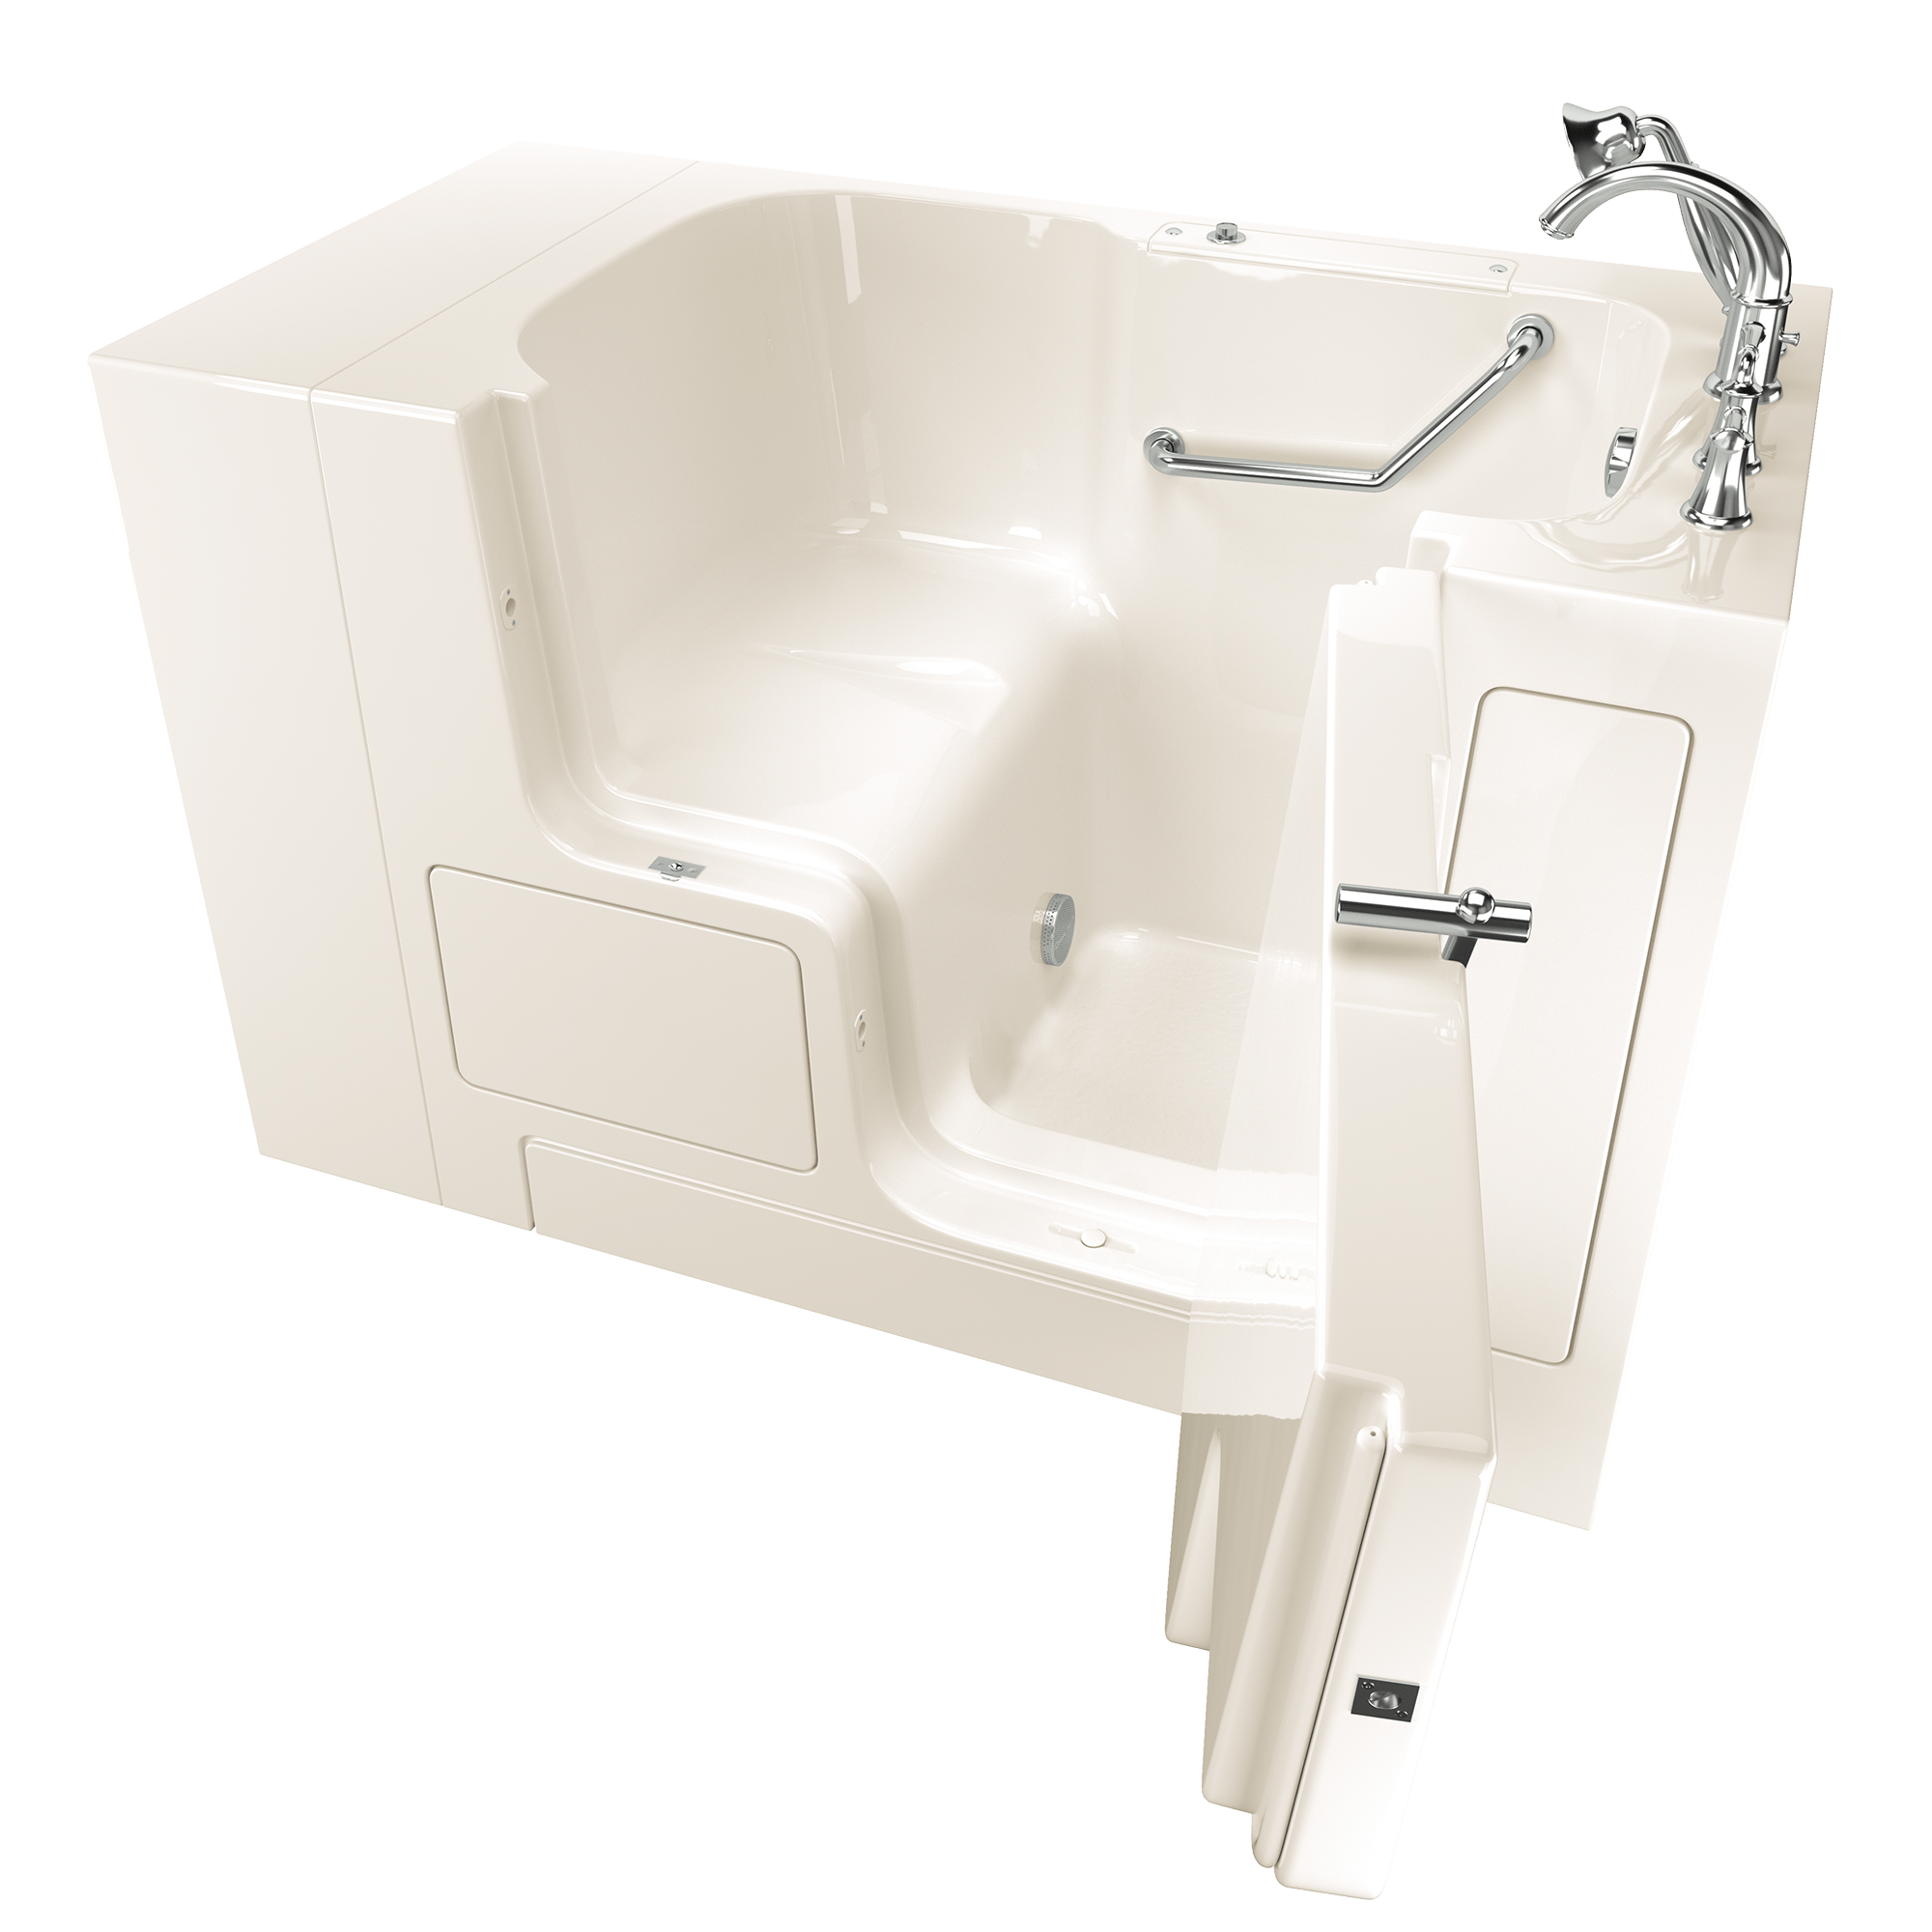 Gelcoat Value Series 32 x 52 -Inch Walk-in Tub With Soaker System - Right-Hand Drain With Faucet